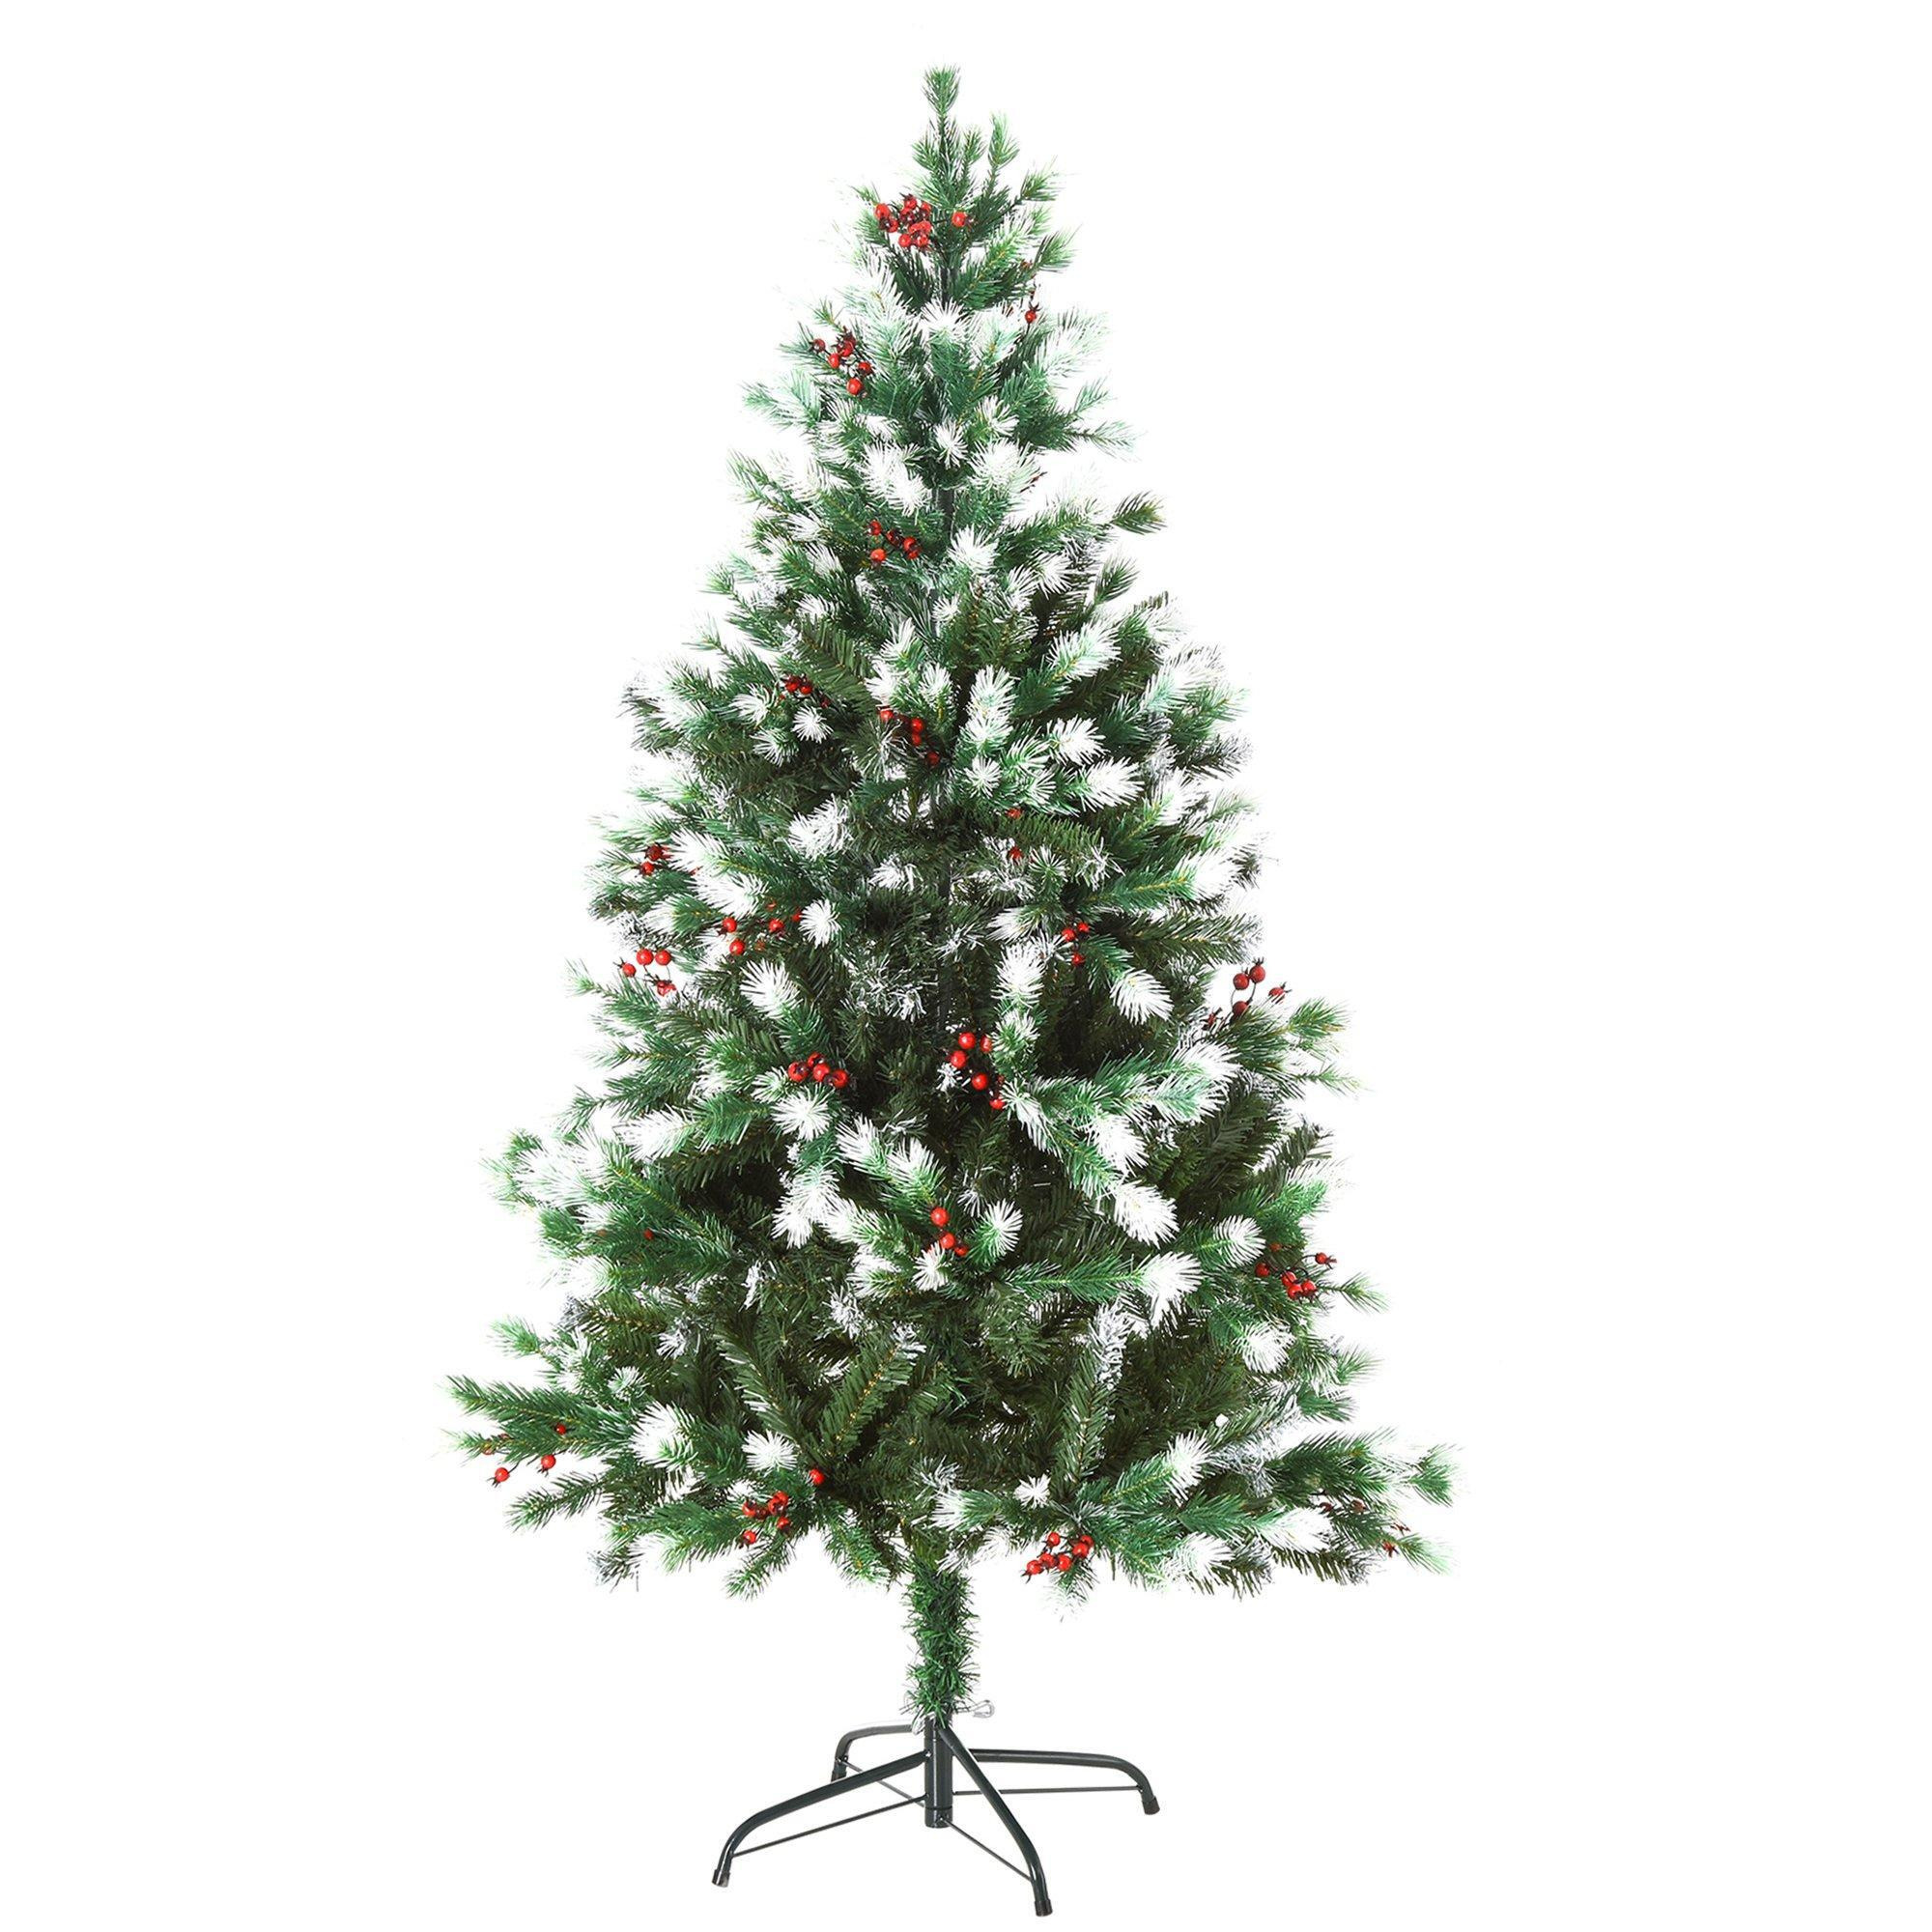 5ft Snow Dipped Artificial Christmas Tree Red Berries Metal Base - image 1